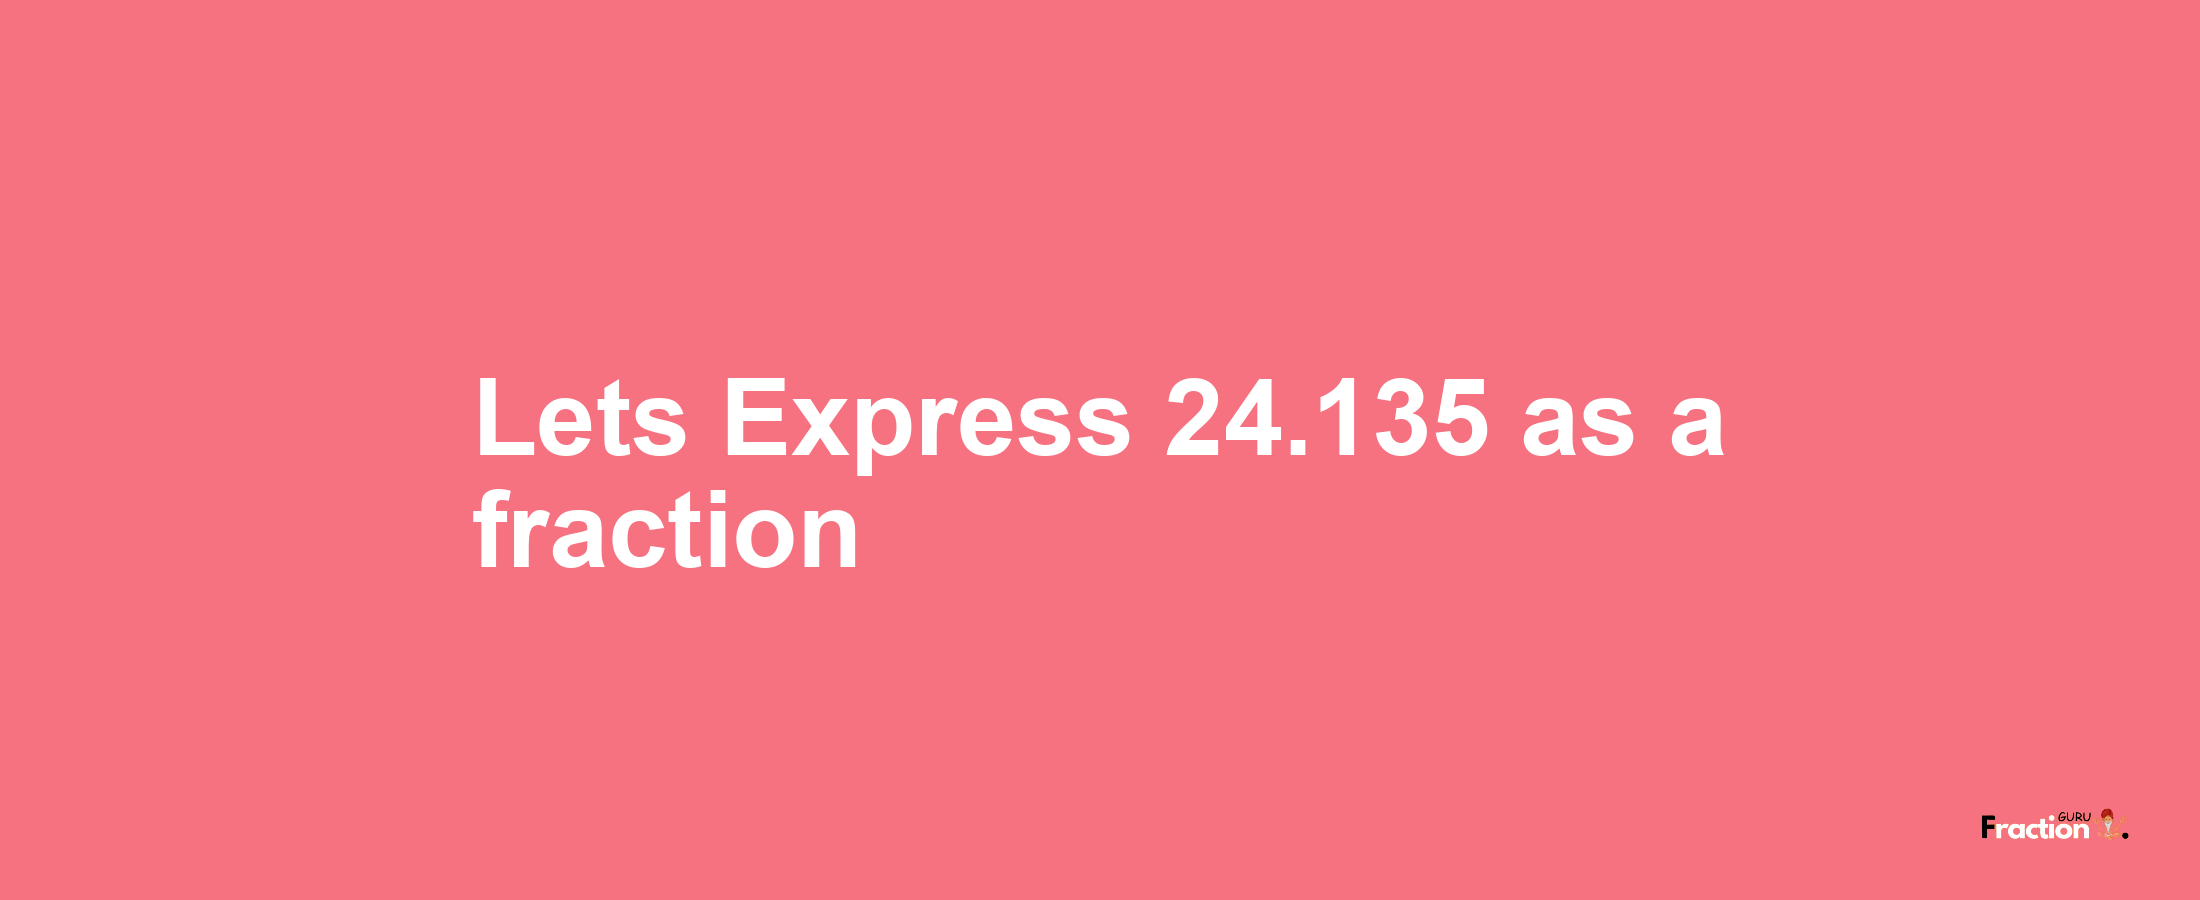 Lets Express 24.135 as afraction